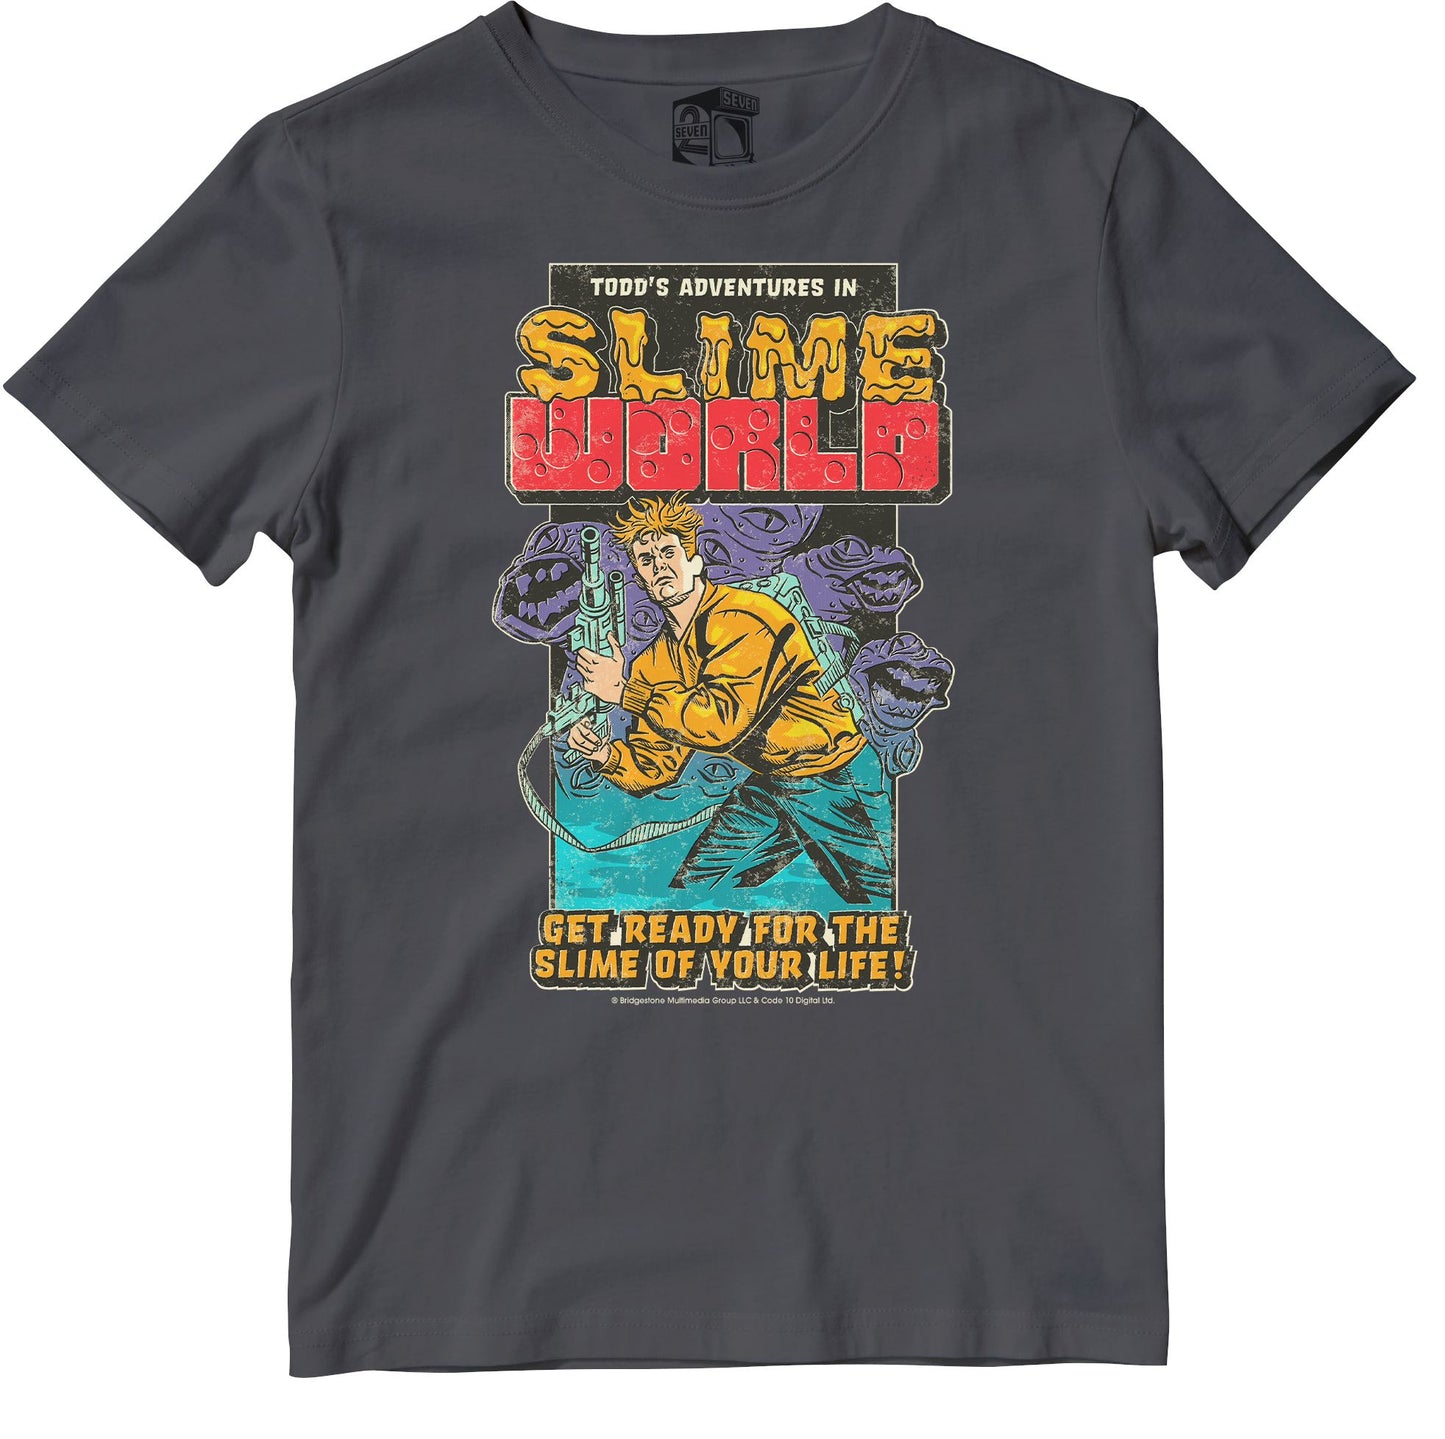 Todds Adventures in Slimeworld Retro Gaming T-Shirt T-Shirt Seven Squared 